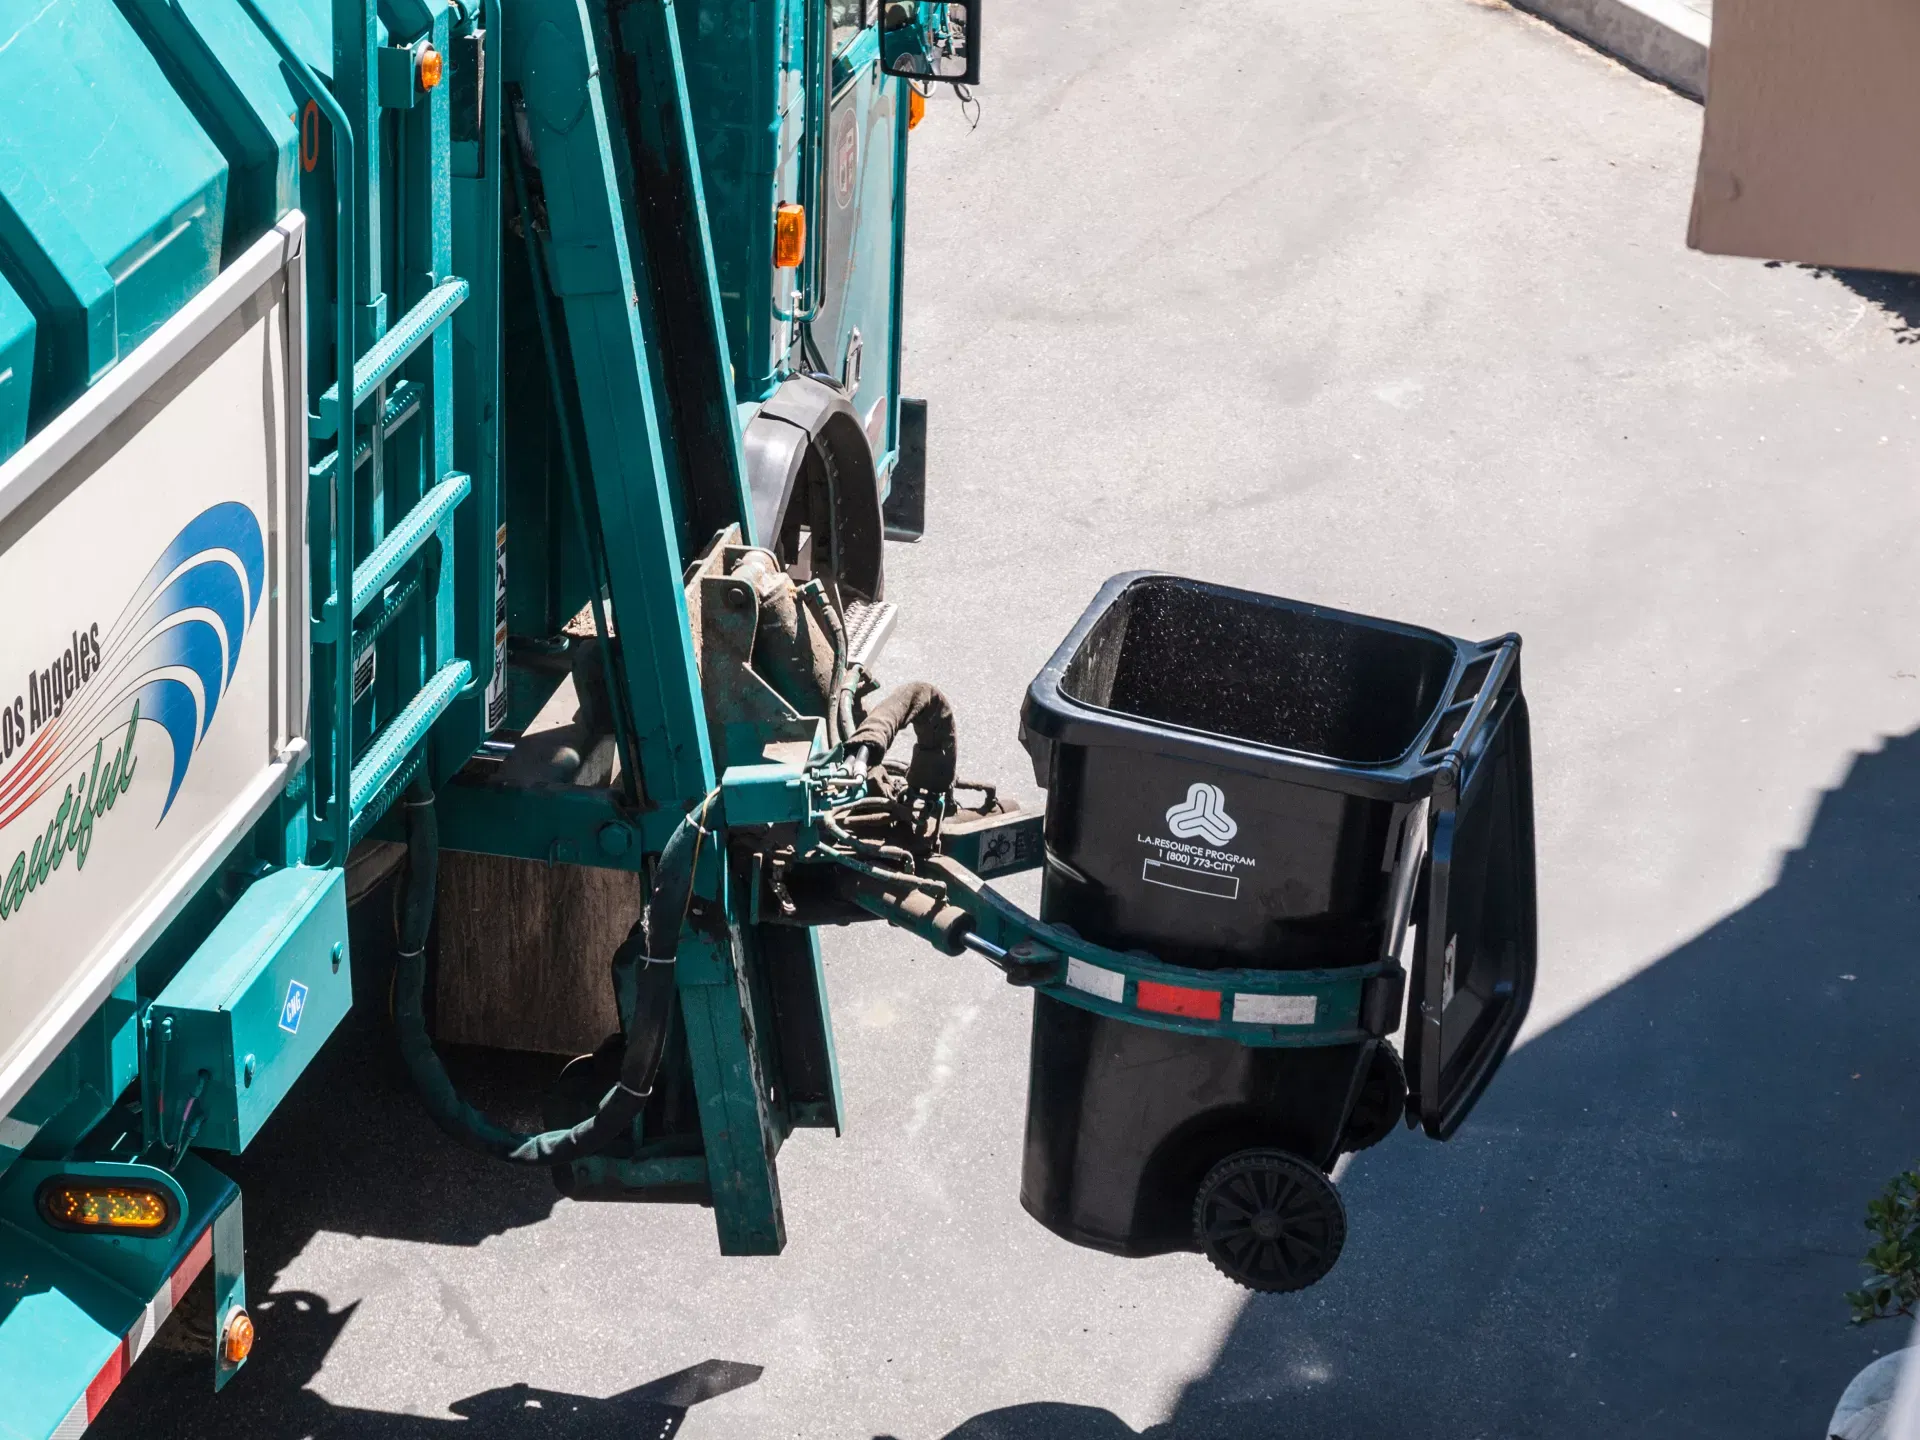 LA Sanitation: Garbage containers need replacement or repair